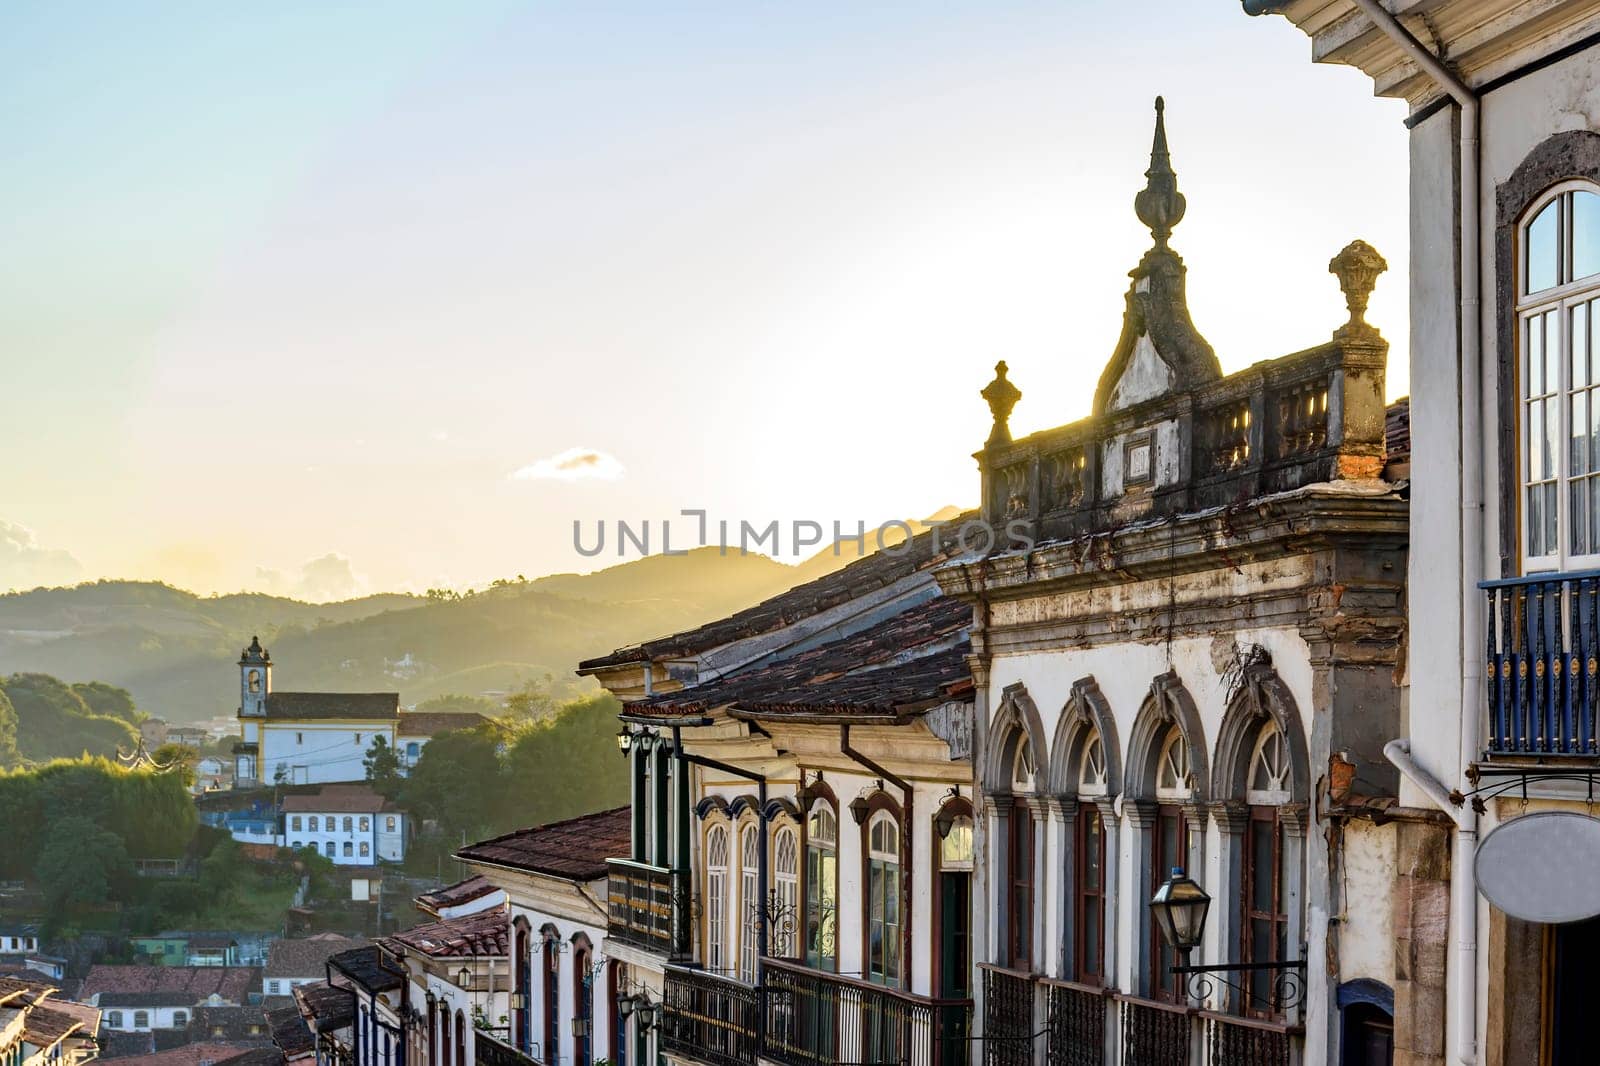 View of colonial style houses facade and historic baroque church in the background on the hills of Ouro Preto city, Minas Gerais state, Brazil